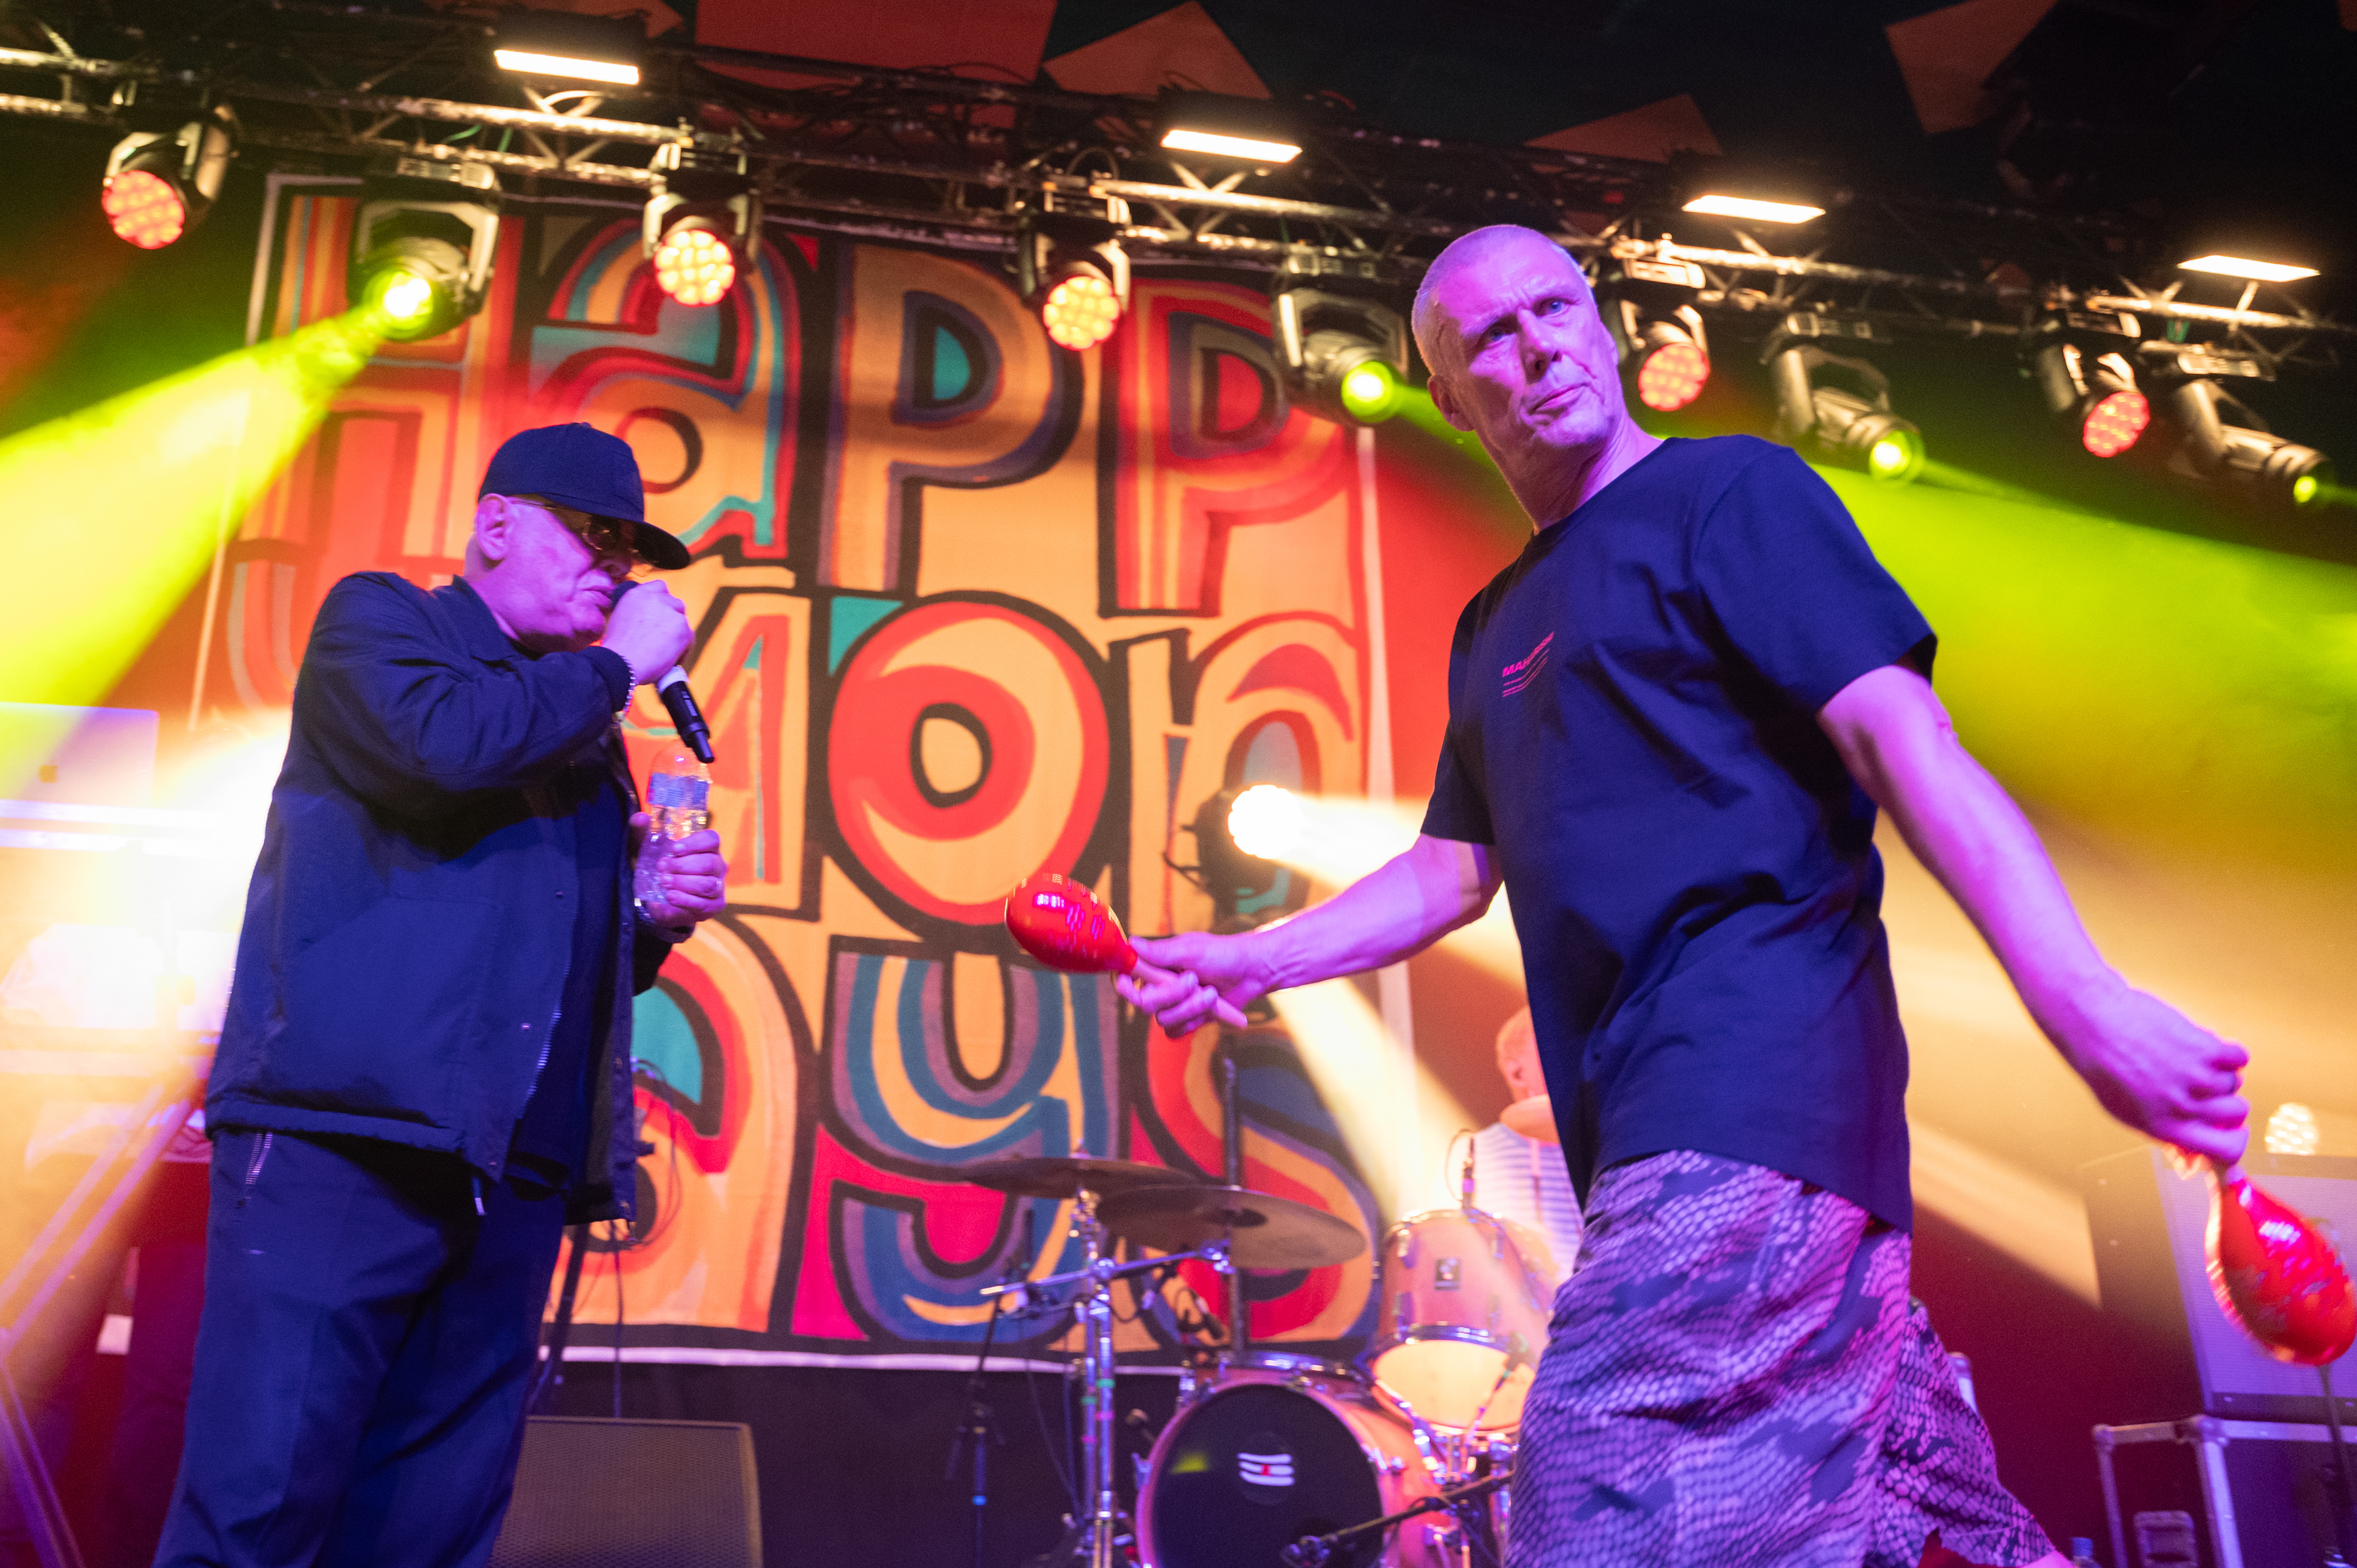 The Happy Mondays reunion was dubbed a car crash and a cynical money making exercise